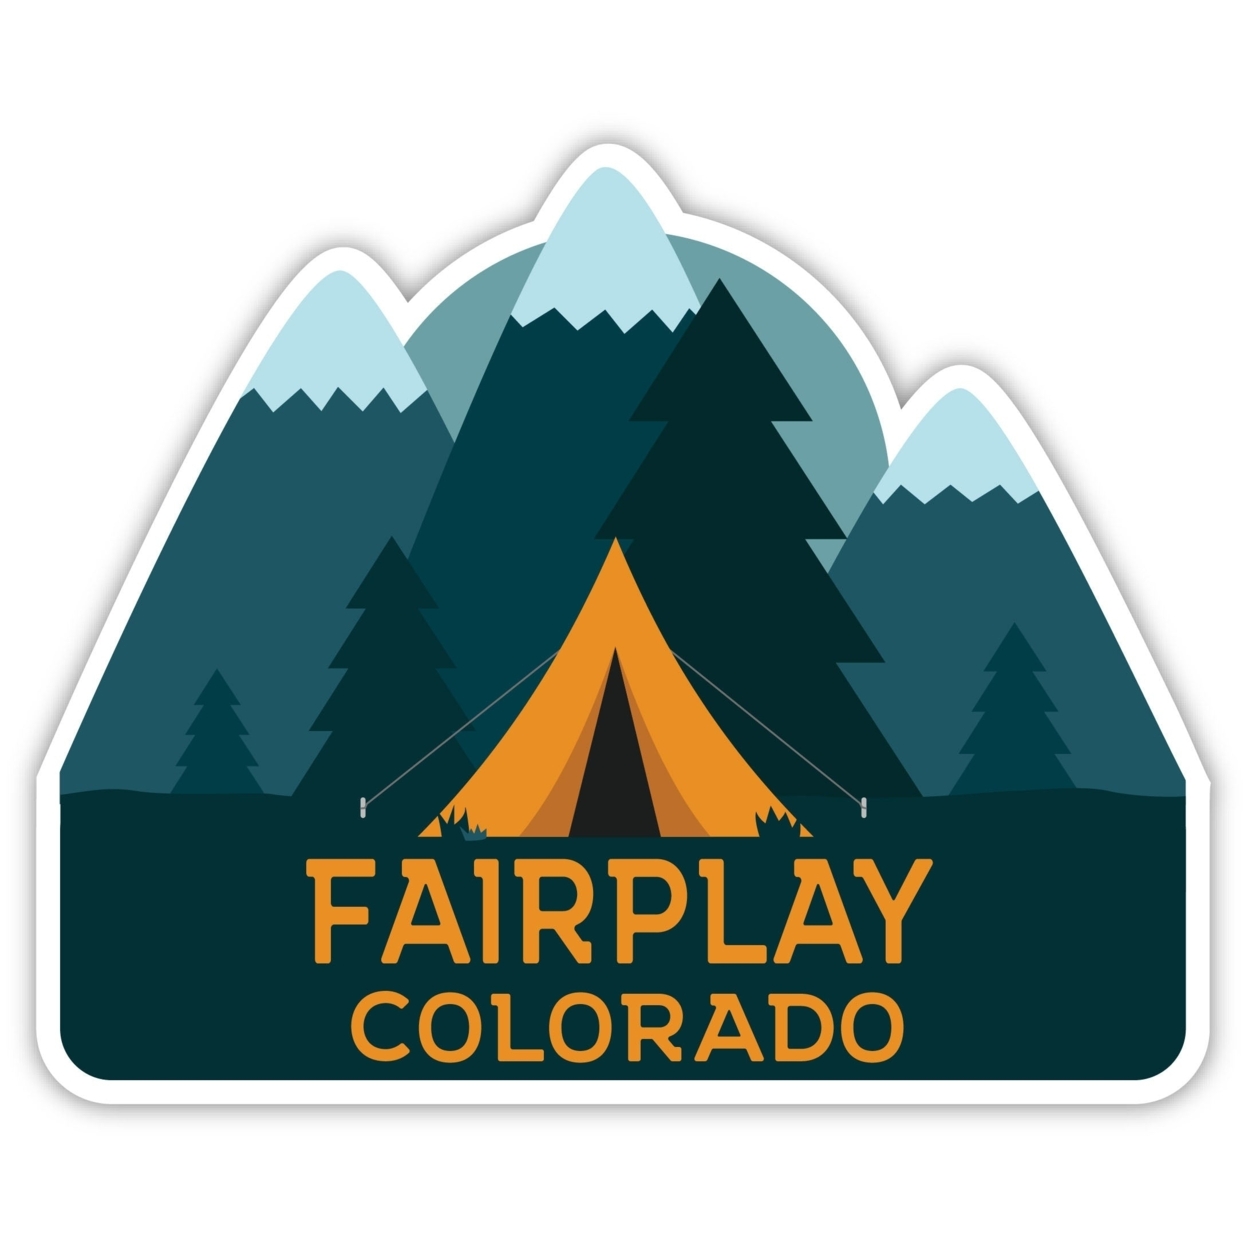 Fairplay Colorado Souvenir Decorative Stickers (Choose Theme And Size) - 4-Pack, 8-Inch, Tent